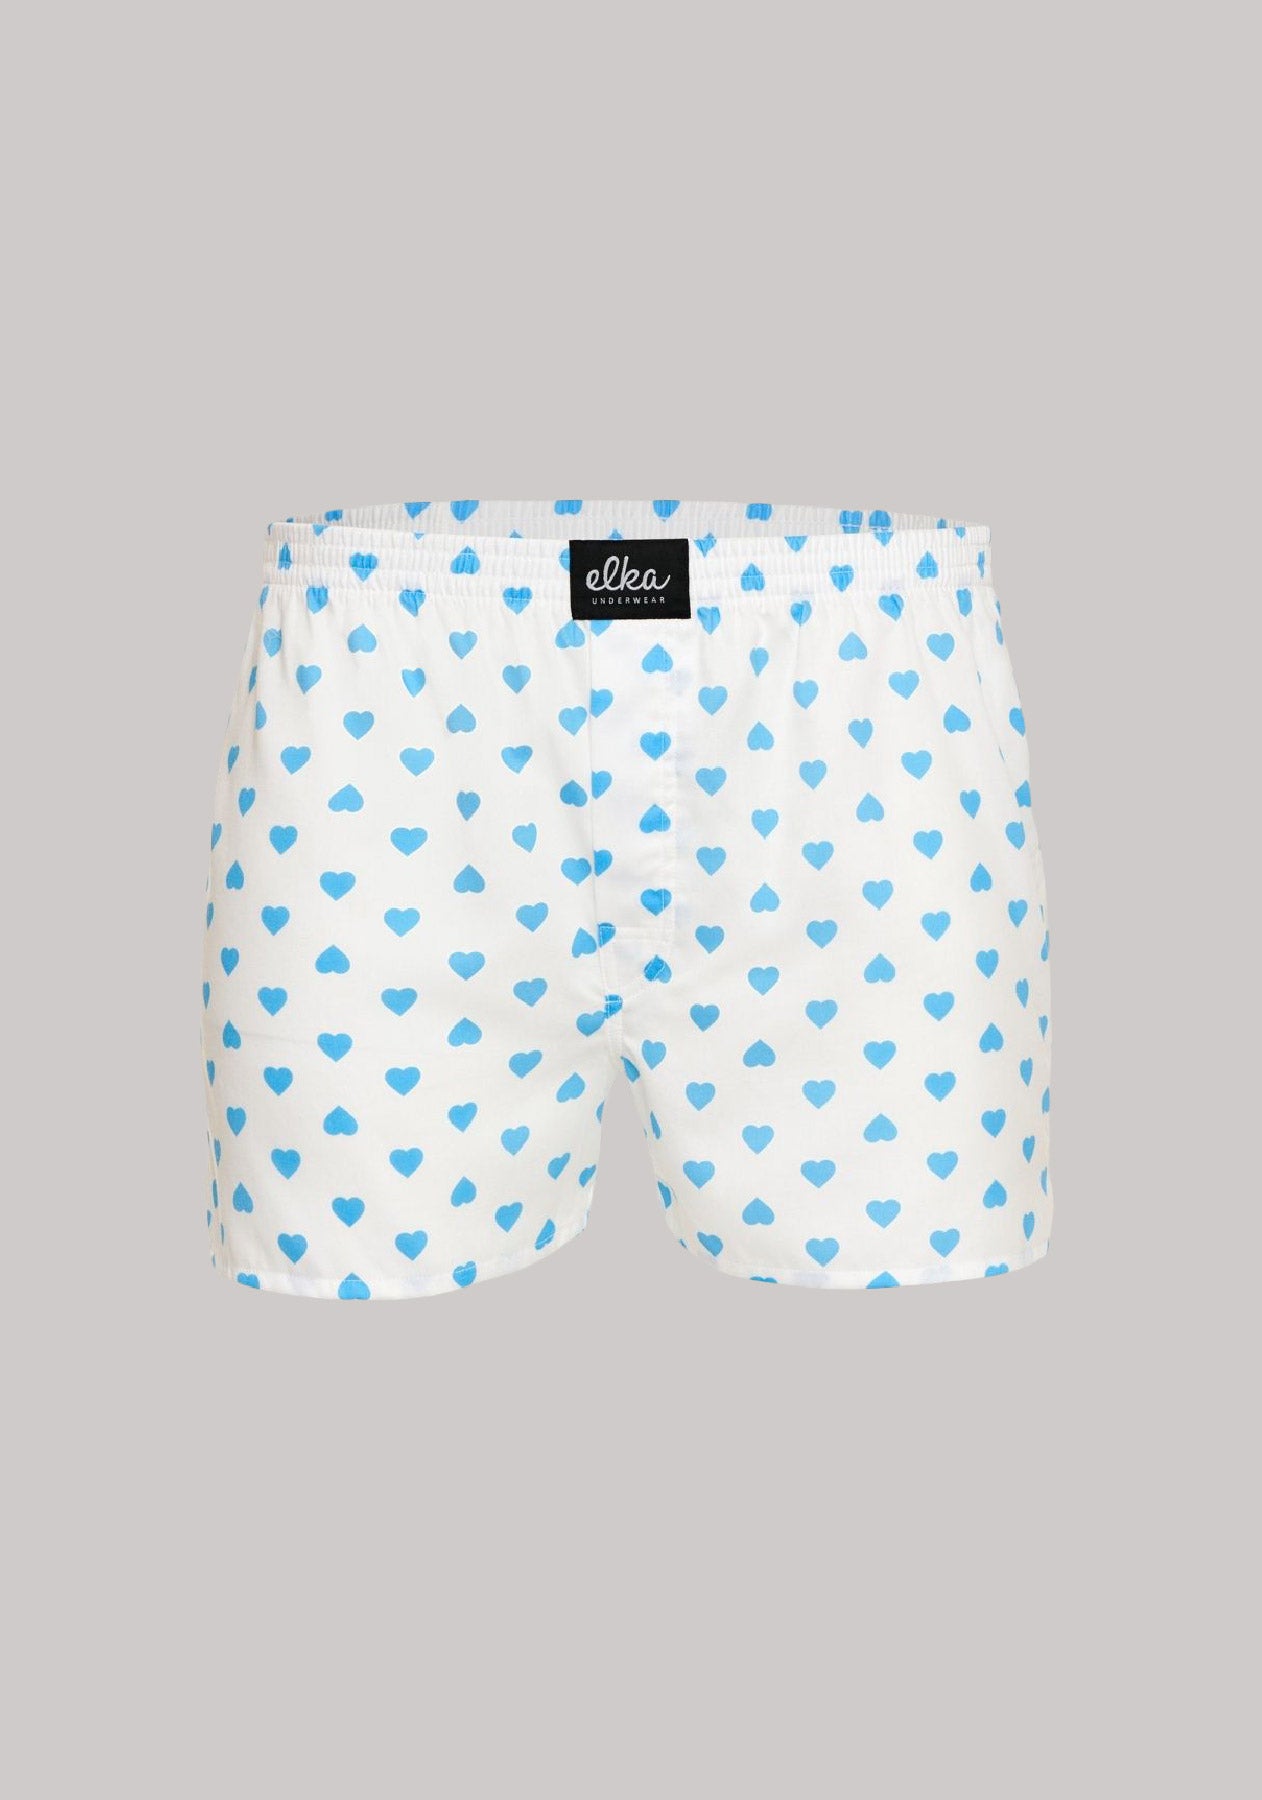 Men's shorts White with hearts